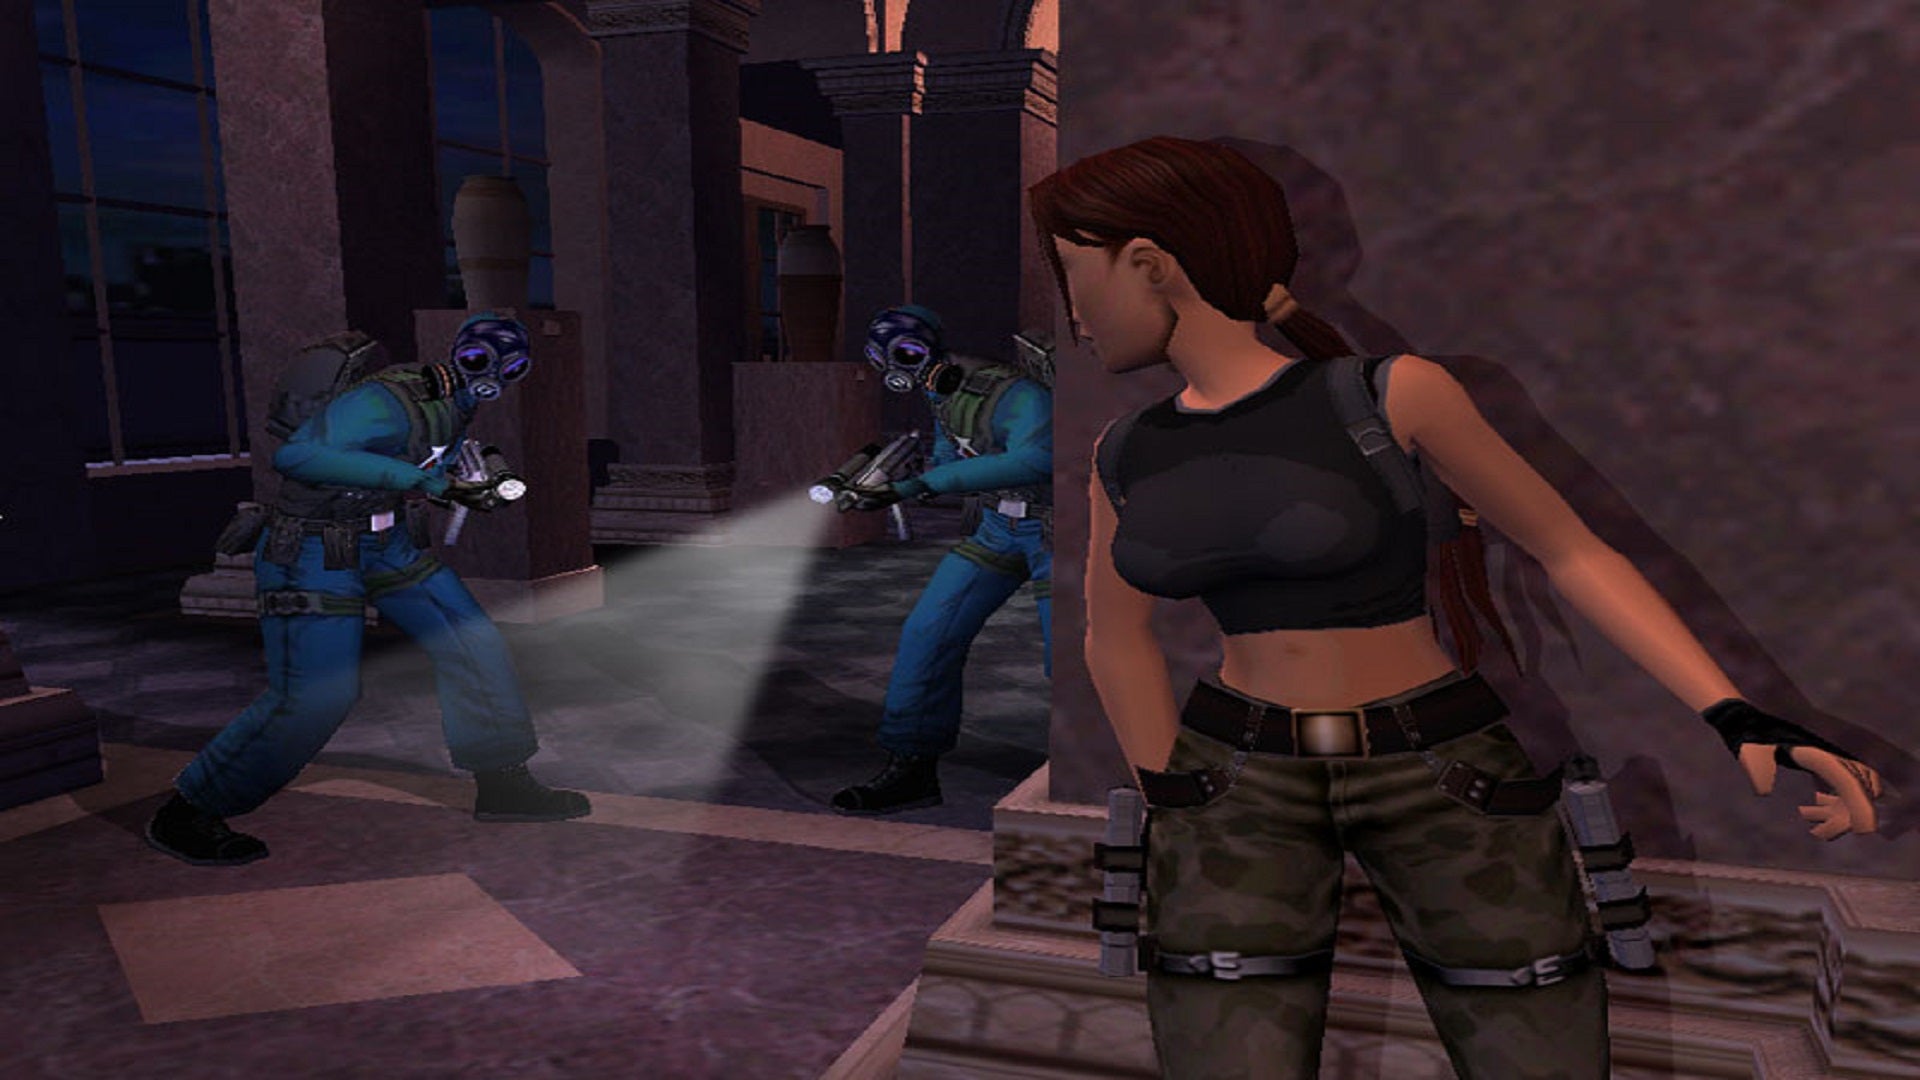 Lara Croft hides behind a wall in the Louvre as she is pursued by armed police.